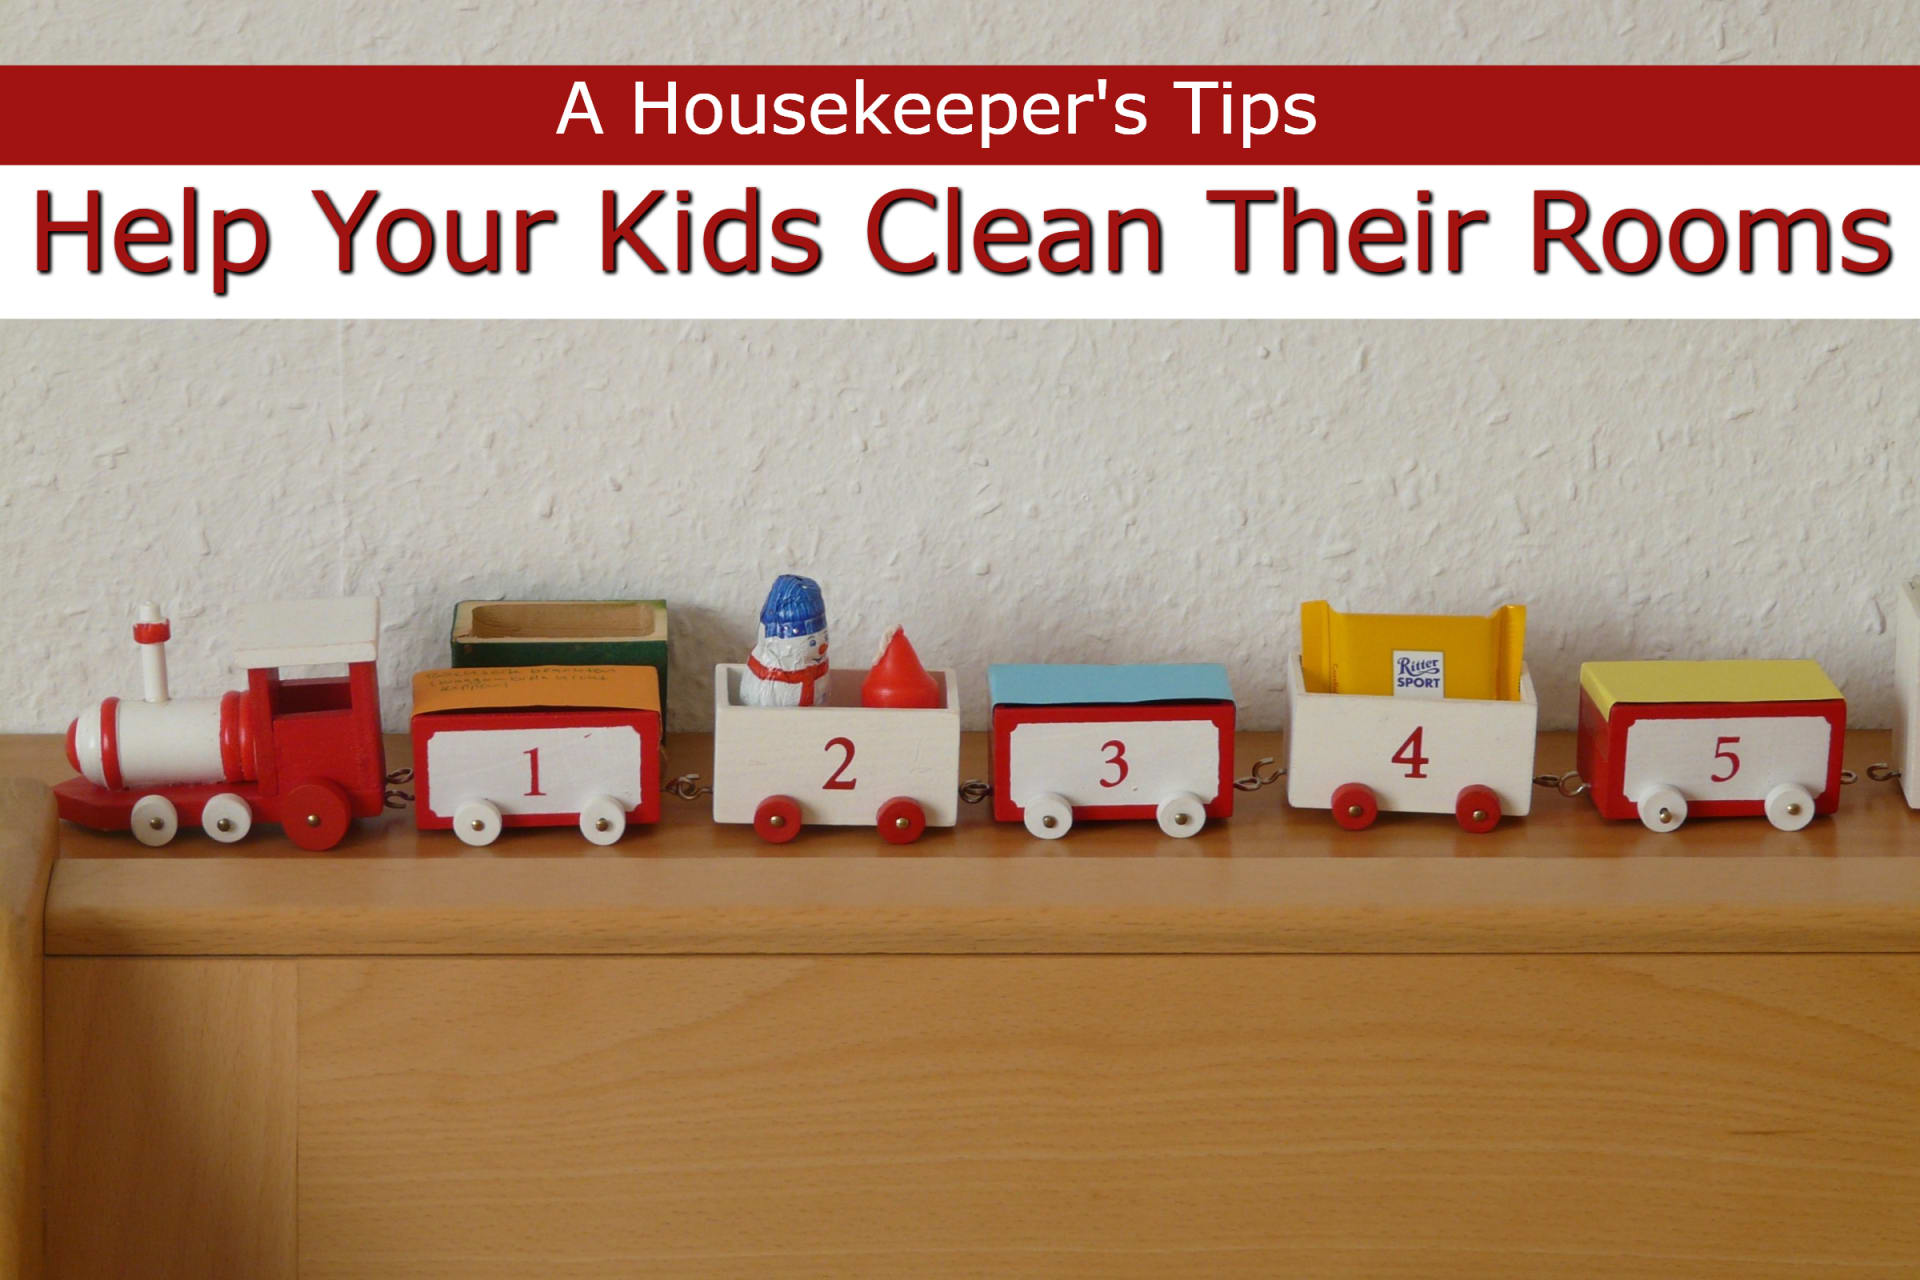 A Housekeeper's Tips to Help Your Kids Clean Their Rooms